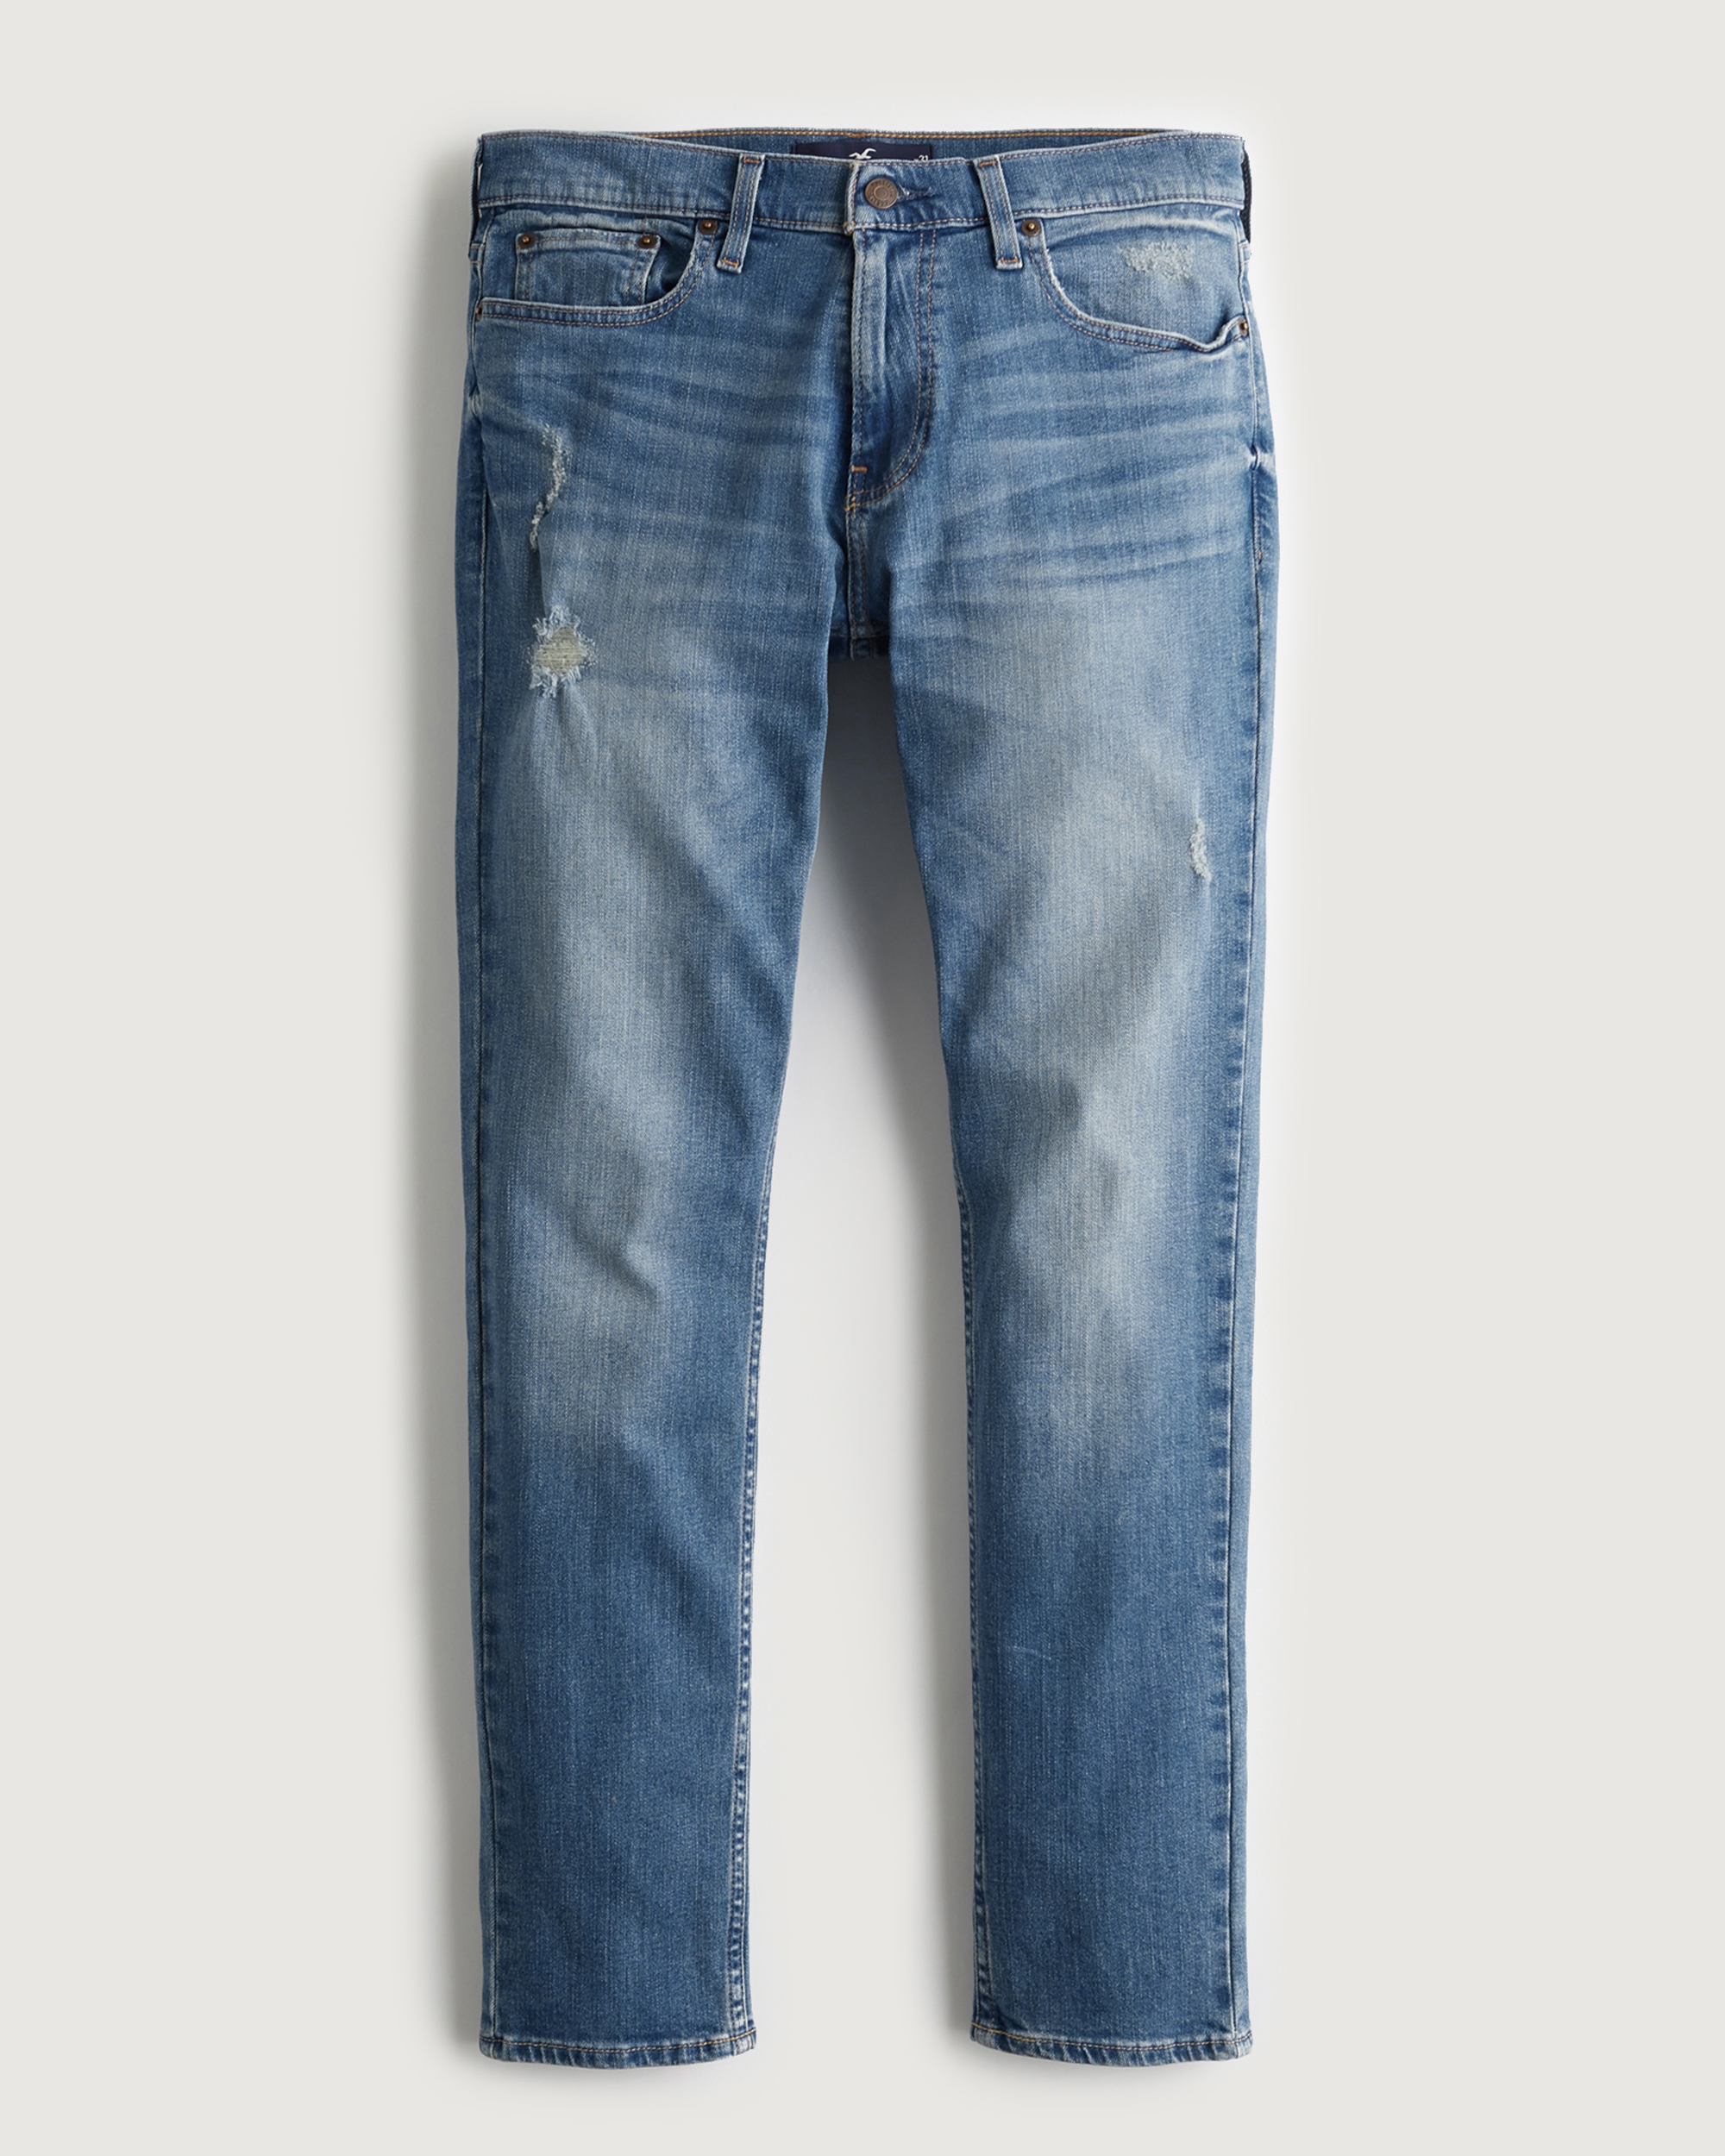 hollister canada jeans